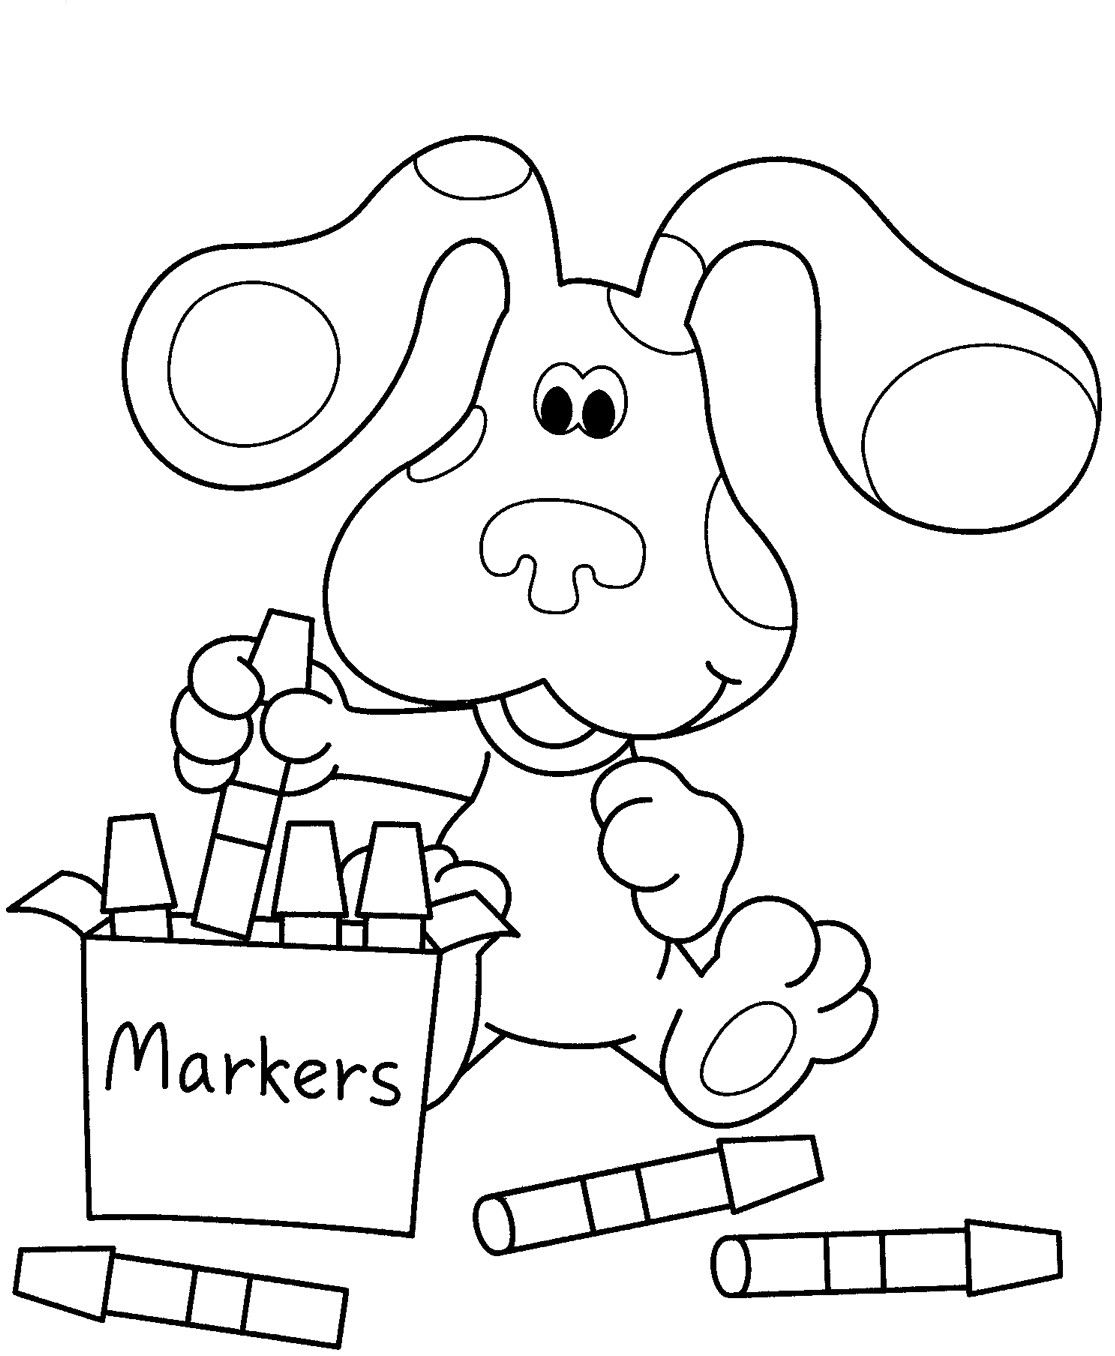 Blue Coloring Pages For Kids
 Free Printable Blues Clues Coloring Pages For Kids